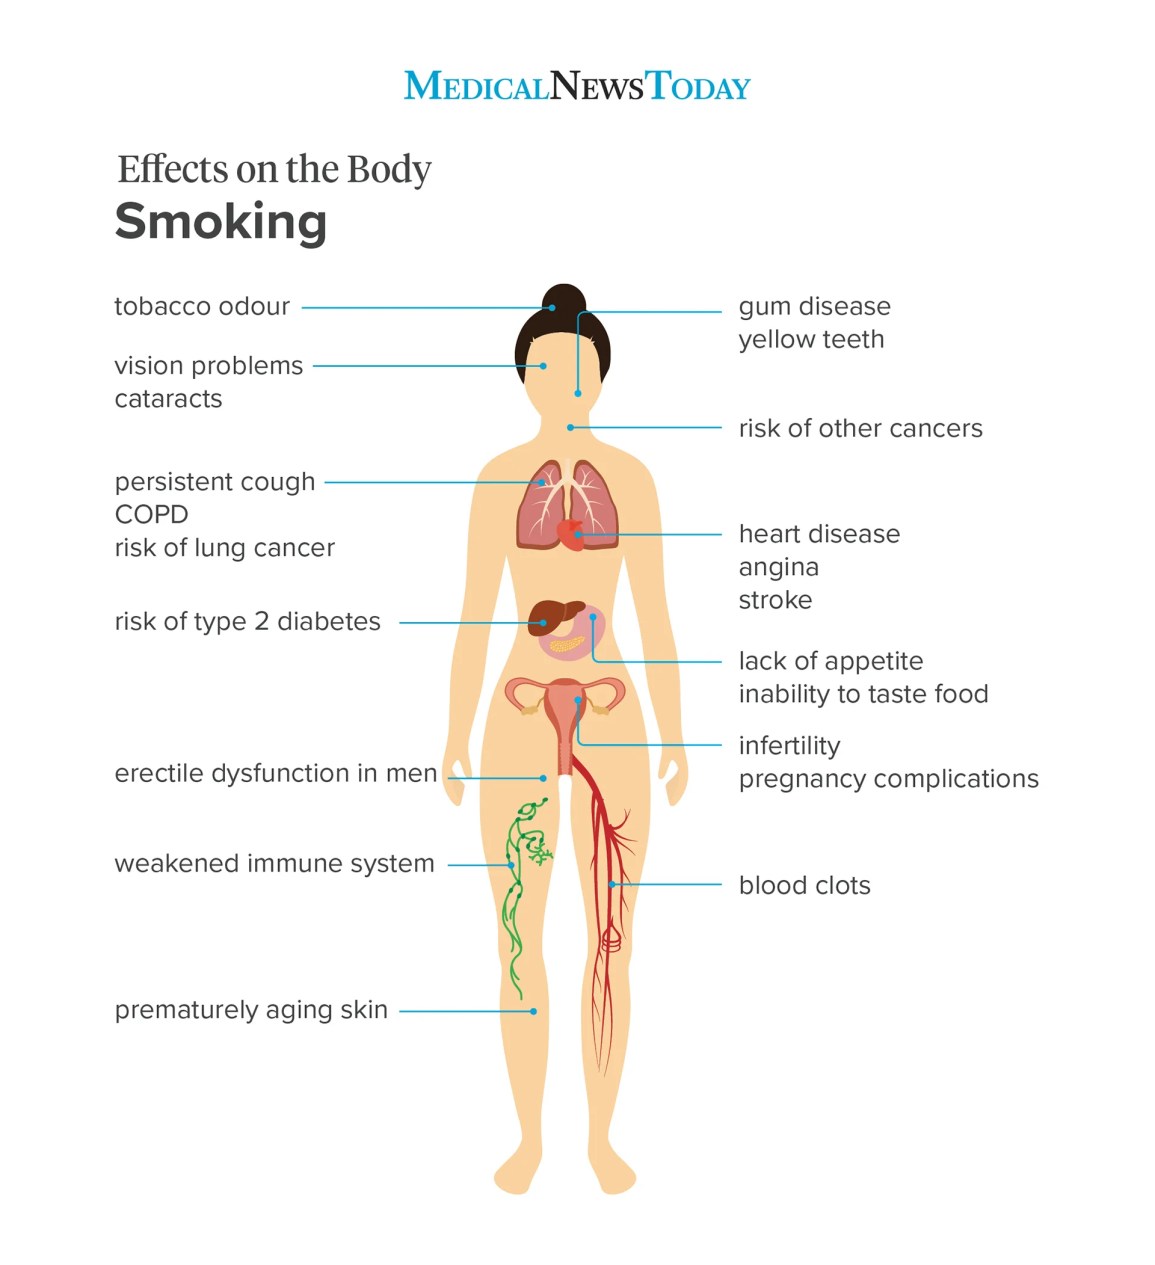 an effects on the body infographic showing the effects on the body of smoking